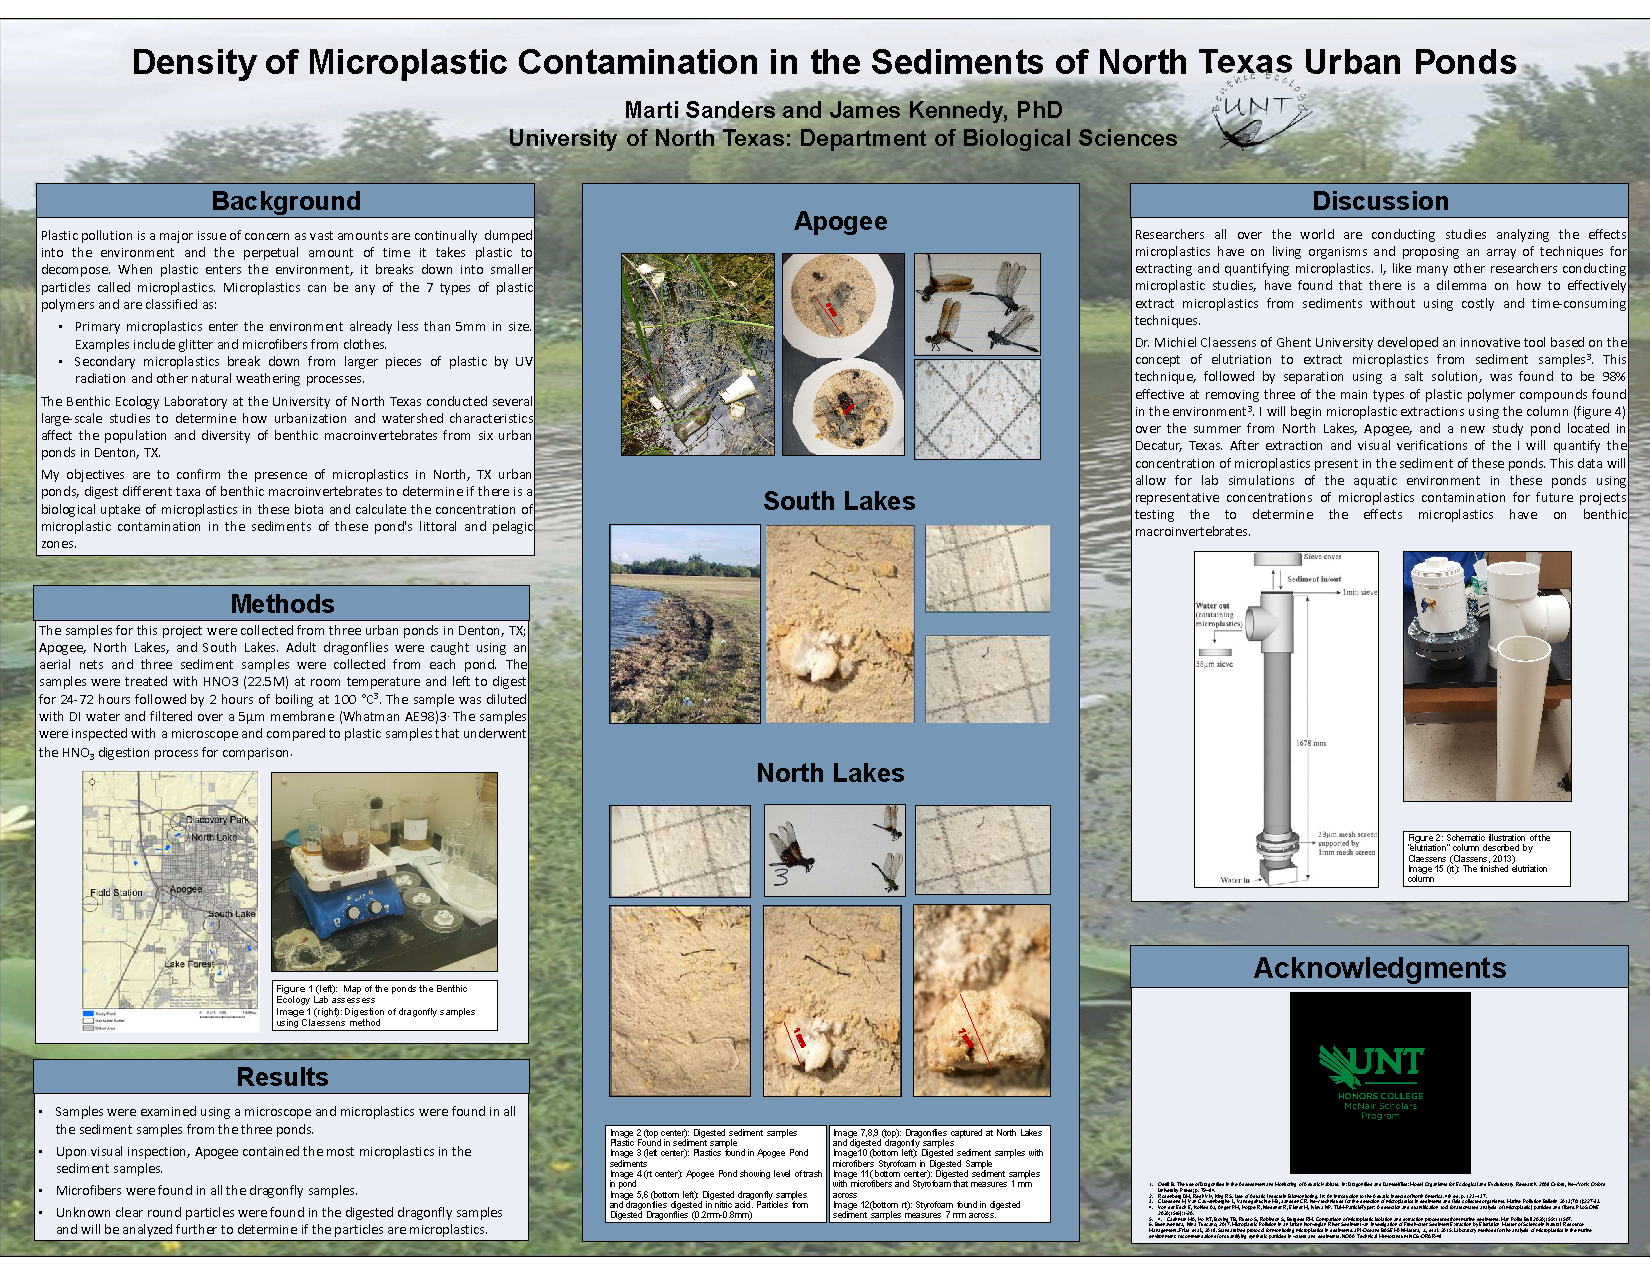 Density of Microplastic Contamination in the Sediments of North Texas Urban Ponds